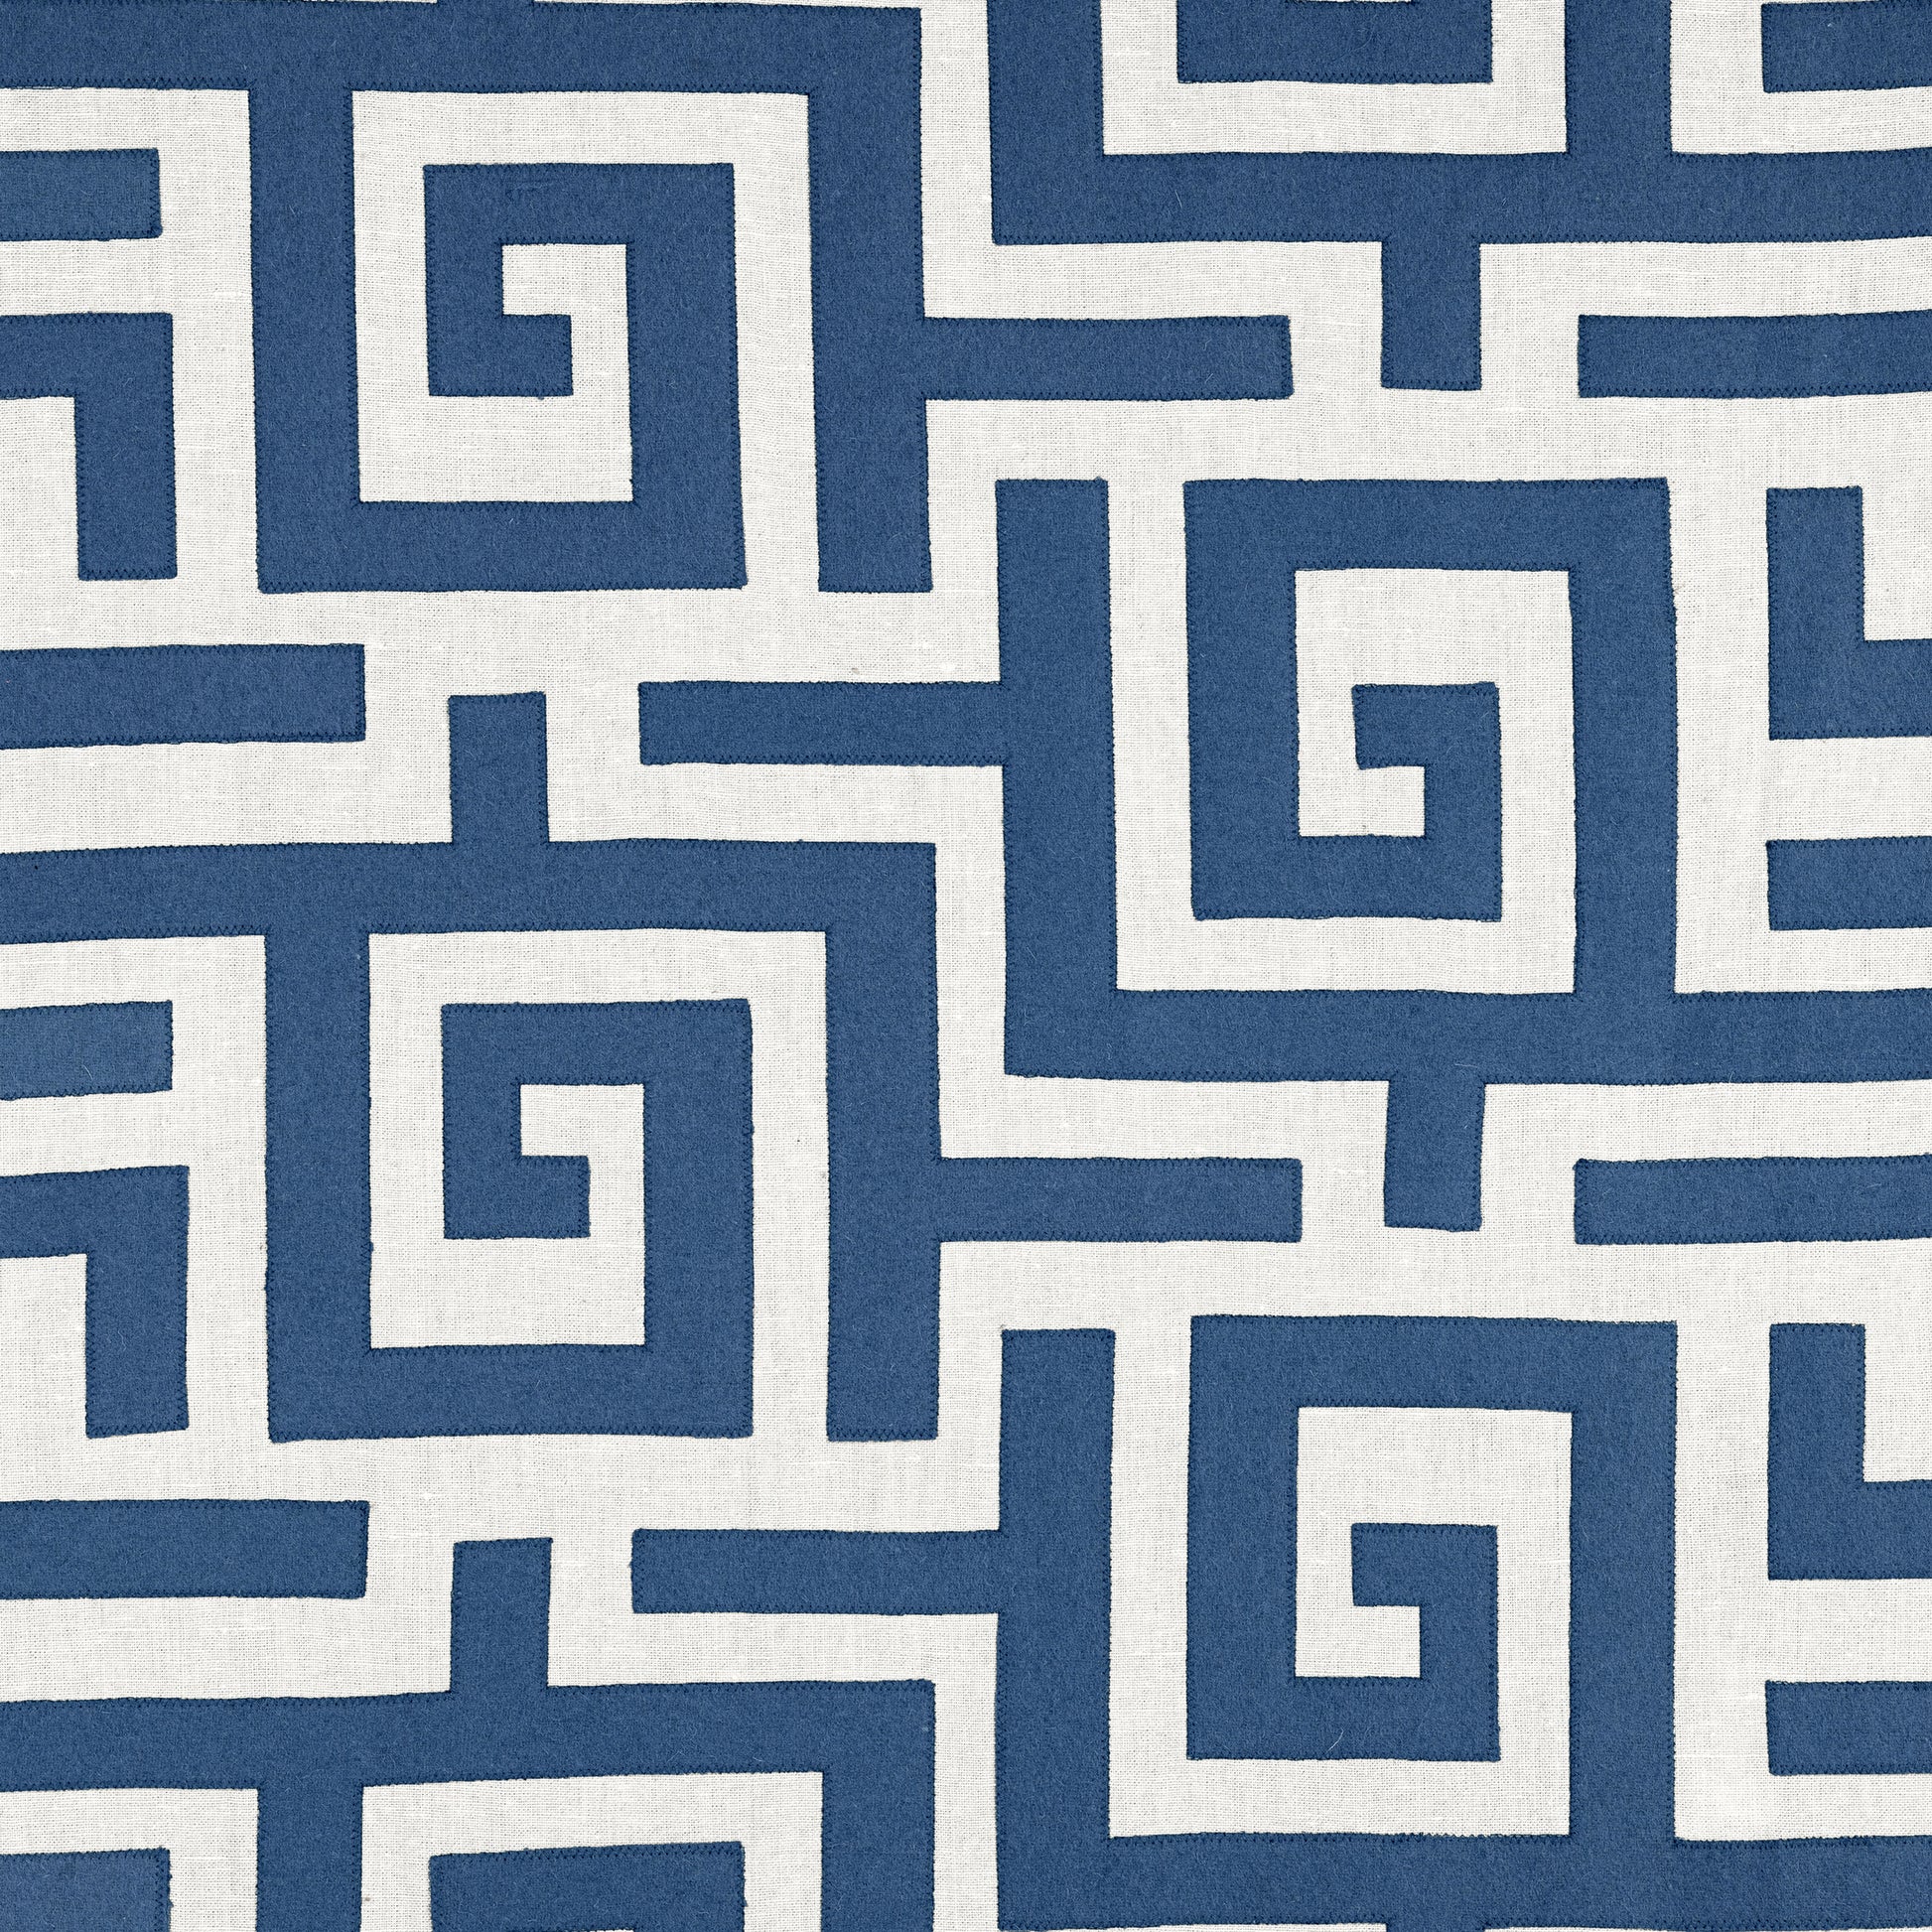 Purchase Thibaut Fabric Product# W713225 pattern name Tulum Applique color Navy